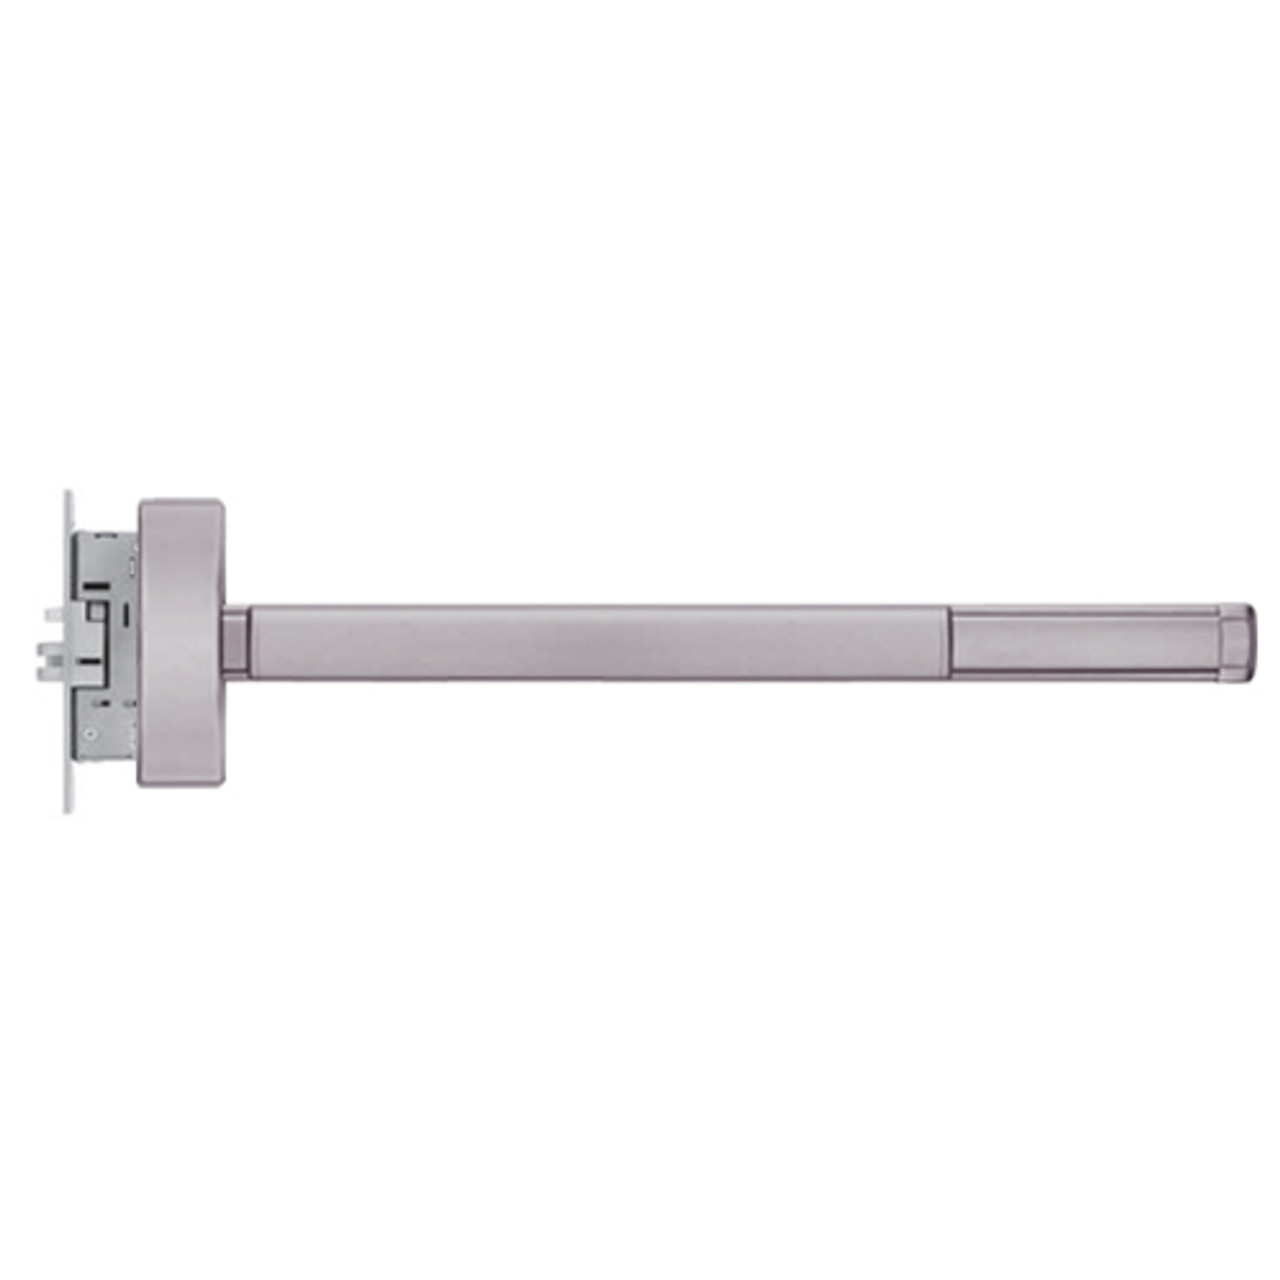 MLR2302-LHR-630-36 PHI 2300 Series Apex Mortise Exit Device with Motorized Latch Retraction Prepped for Dummy Trim in Satin Stainless Steel Finish